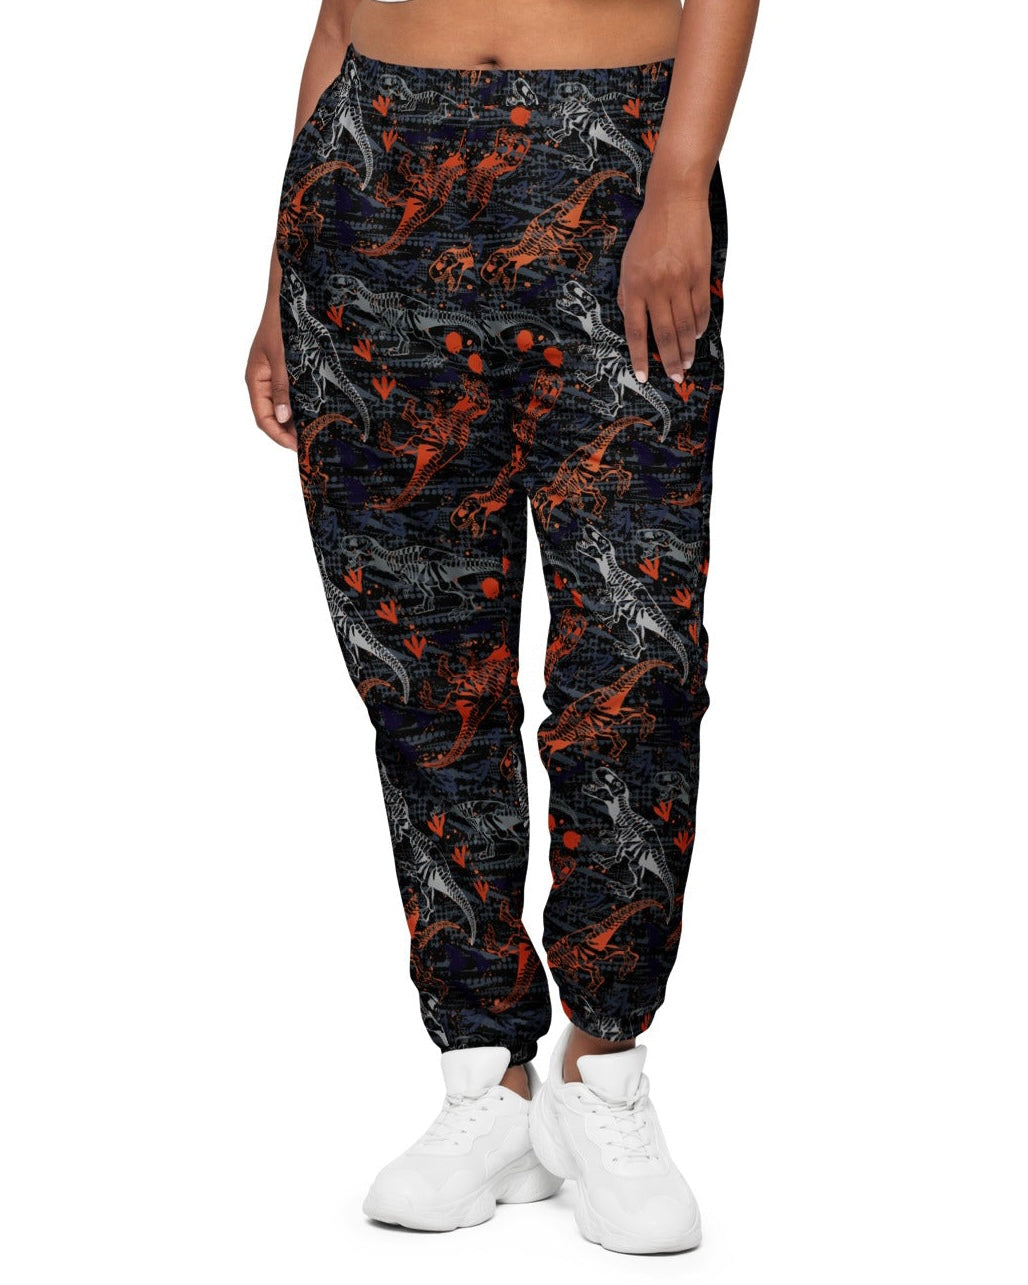 Front view of model wearing One Stop Rave's T-Wrecked Unisex Track Pants, showing off the dynamic dinosaur print.